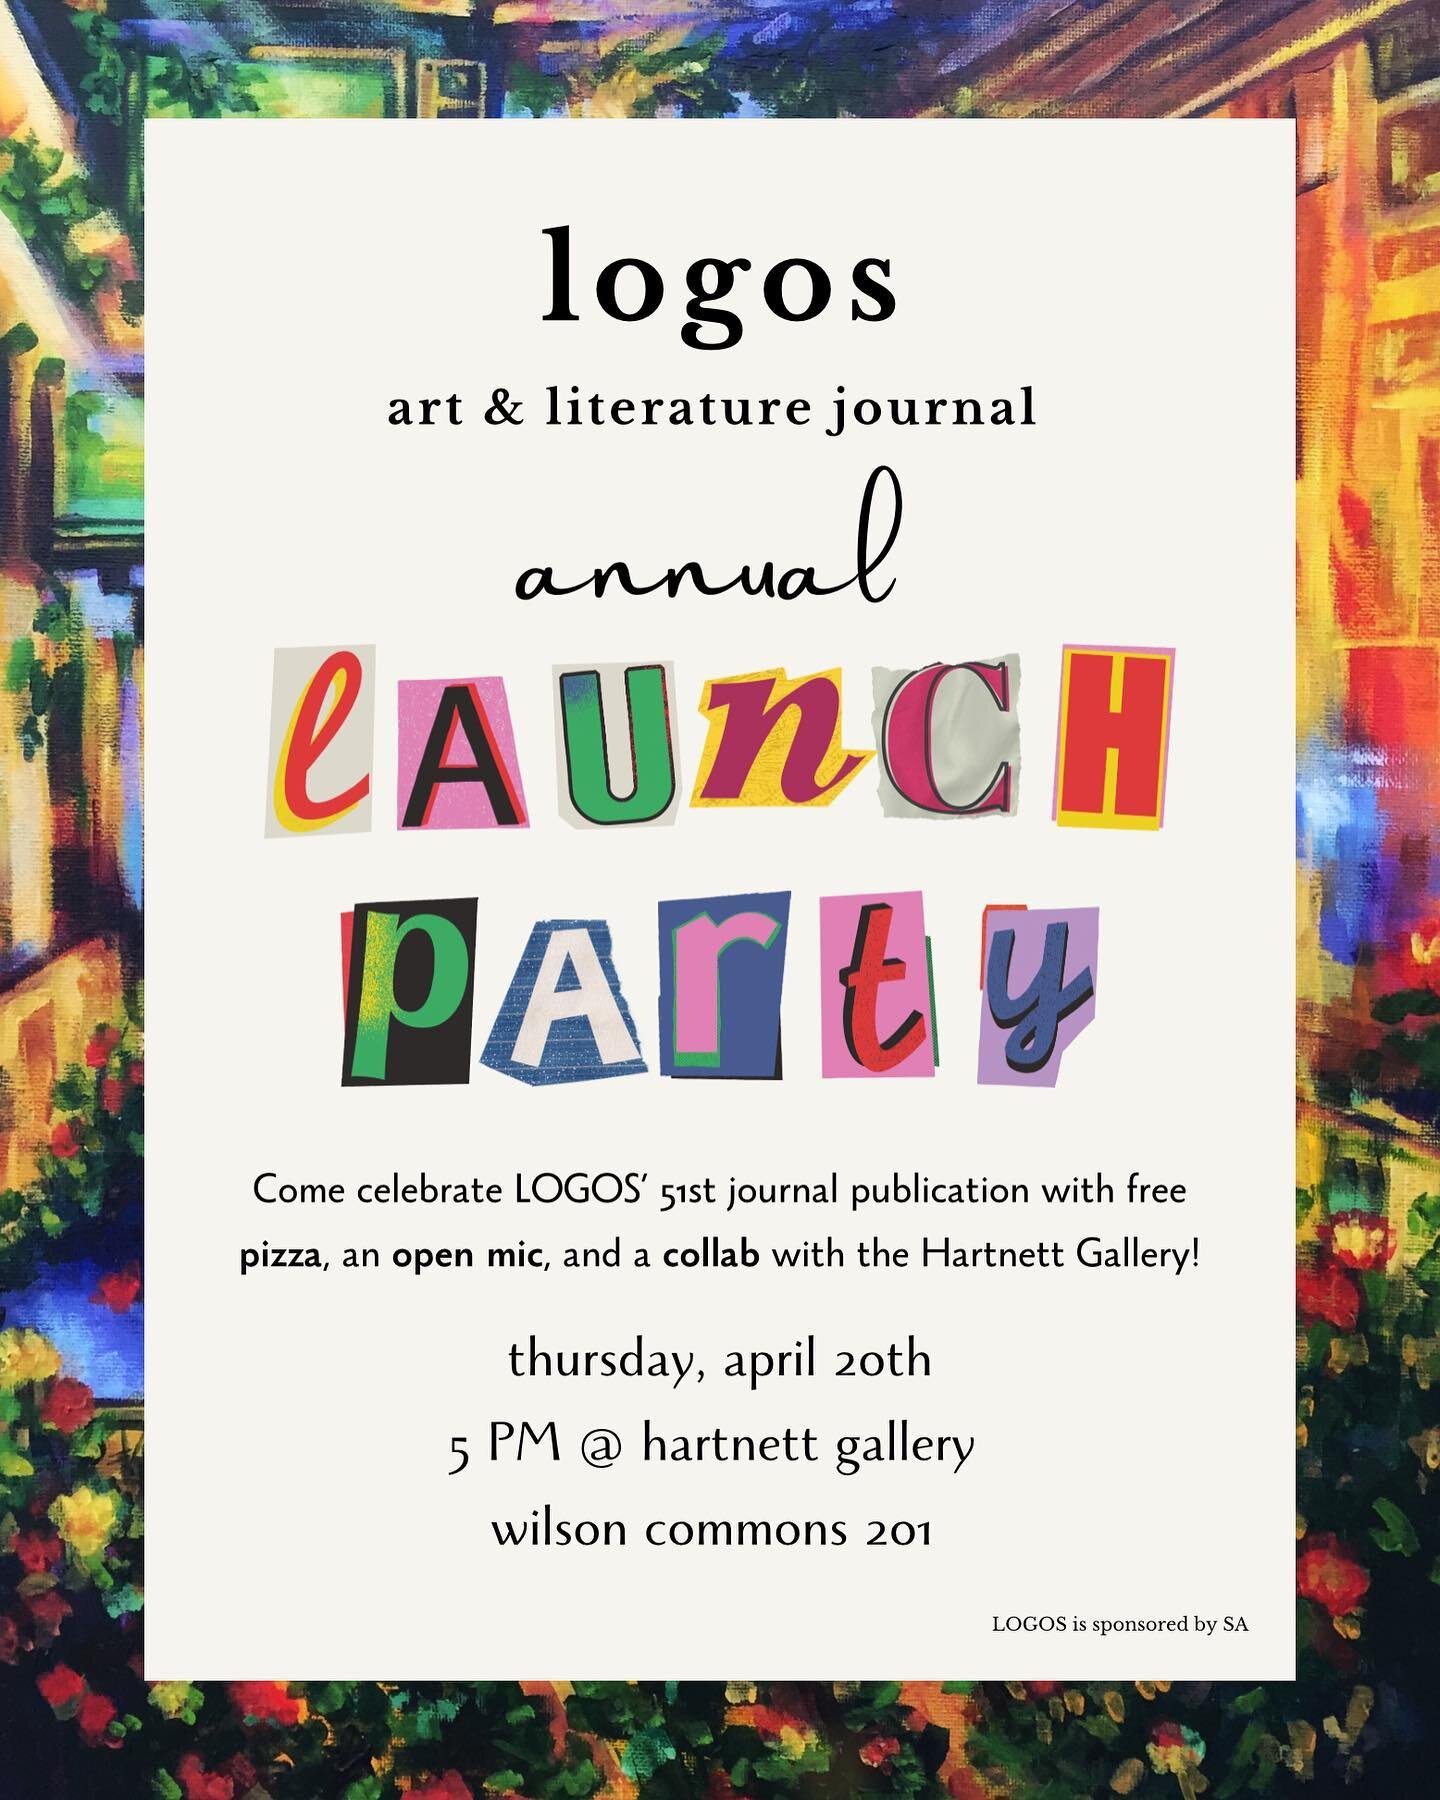 Come join LOGOS in celebrating the launch of our annual art and literature journal!